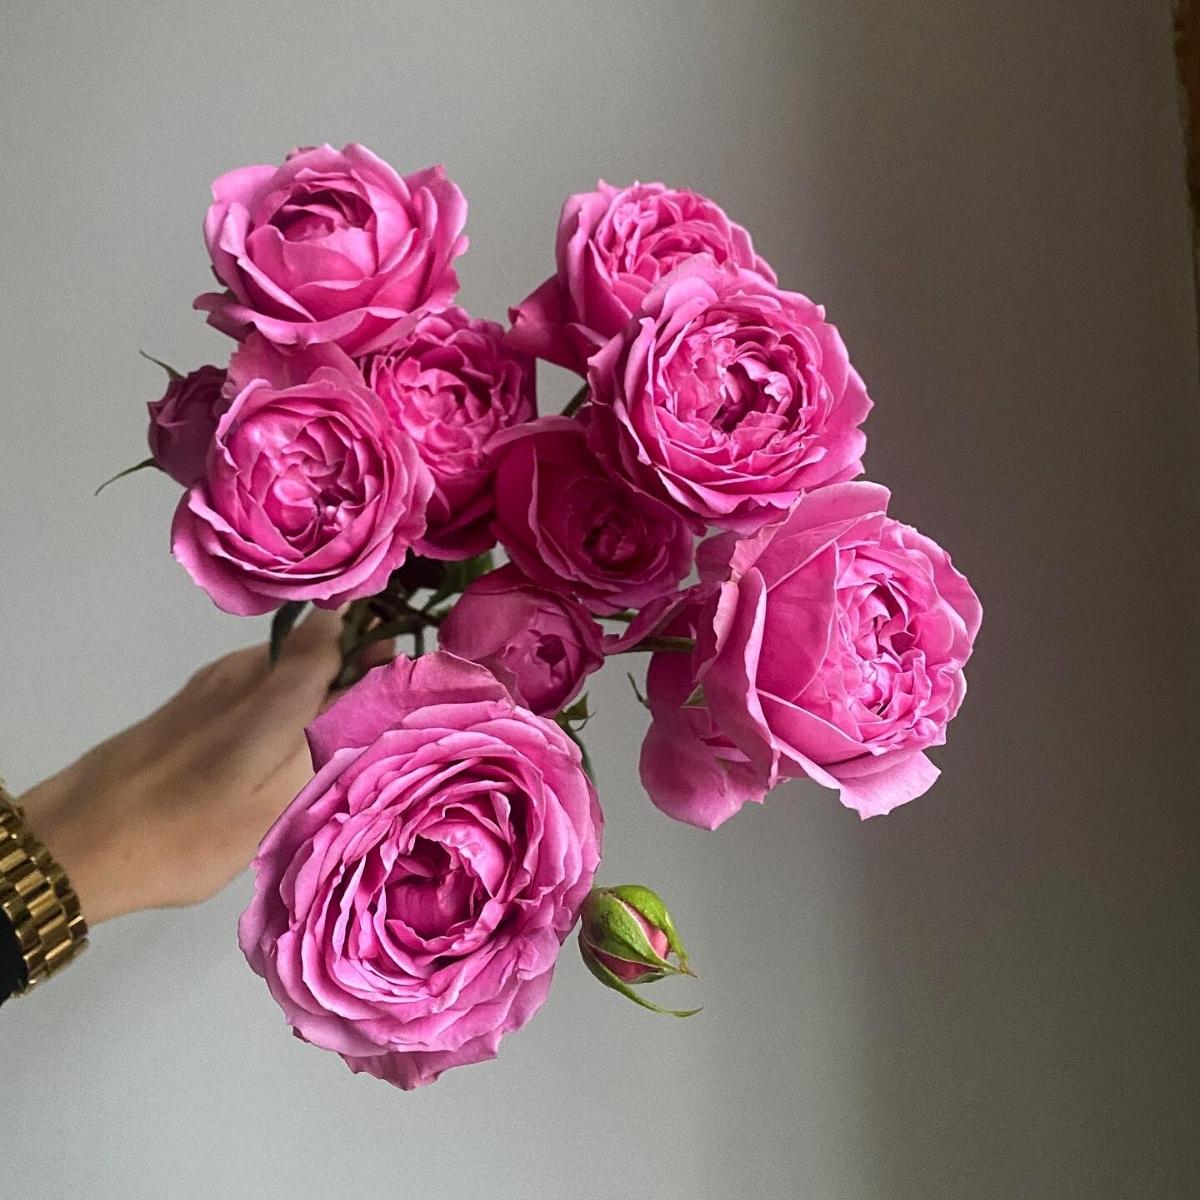 8-popular-spray-roses-in-eastern-europe-from-de-ruiter-featured